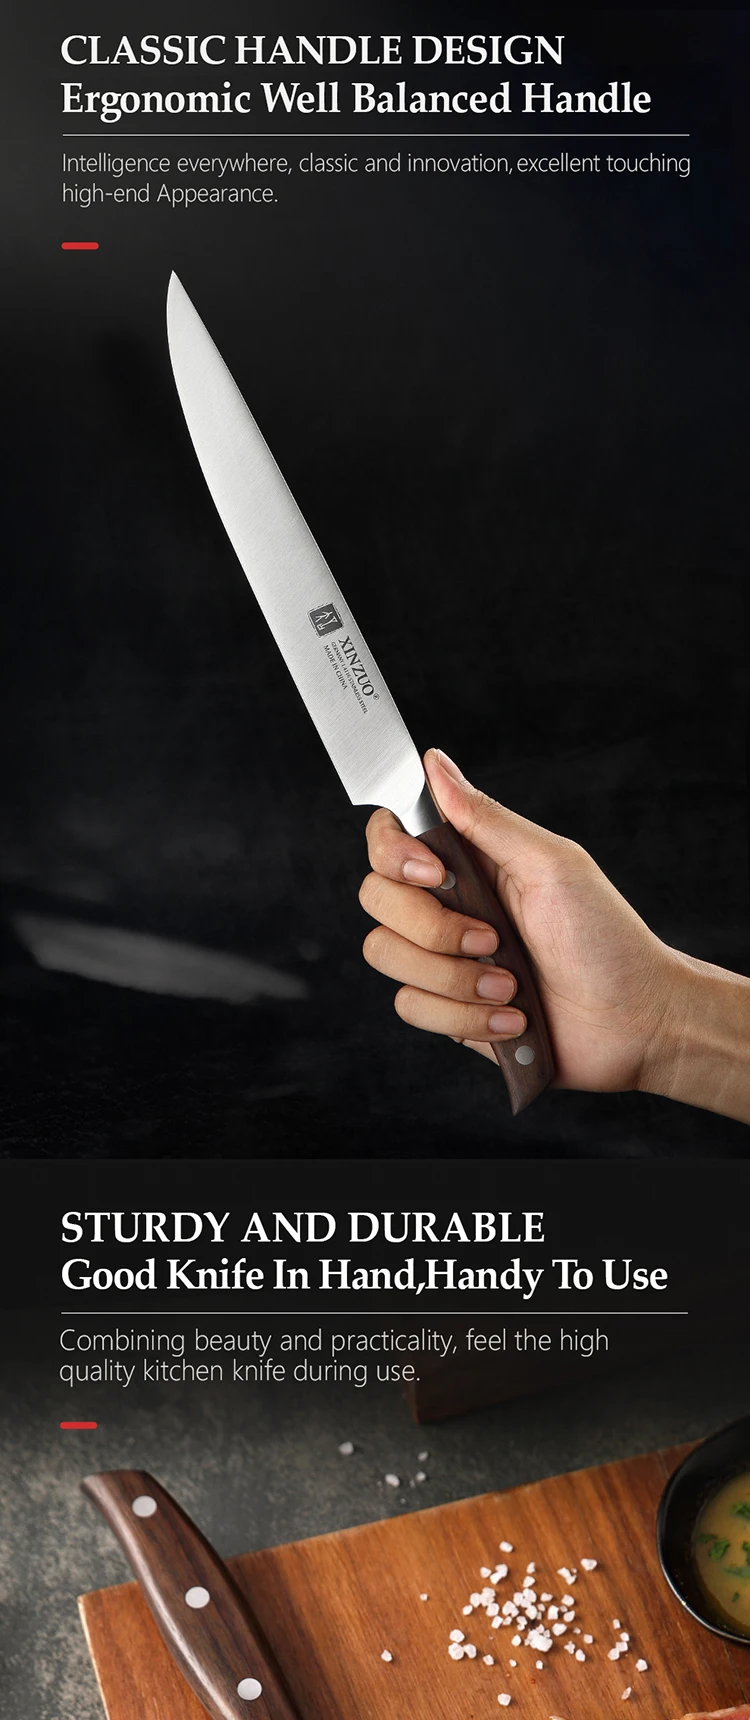 8 inch Professional German stainless steel 1.4116 kitchen chef caving knife